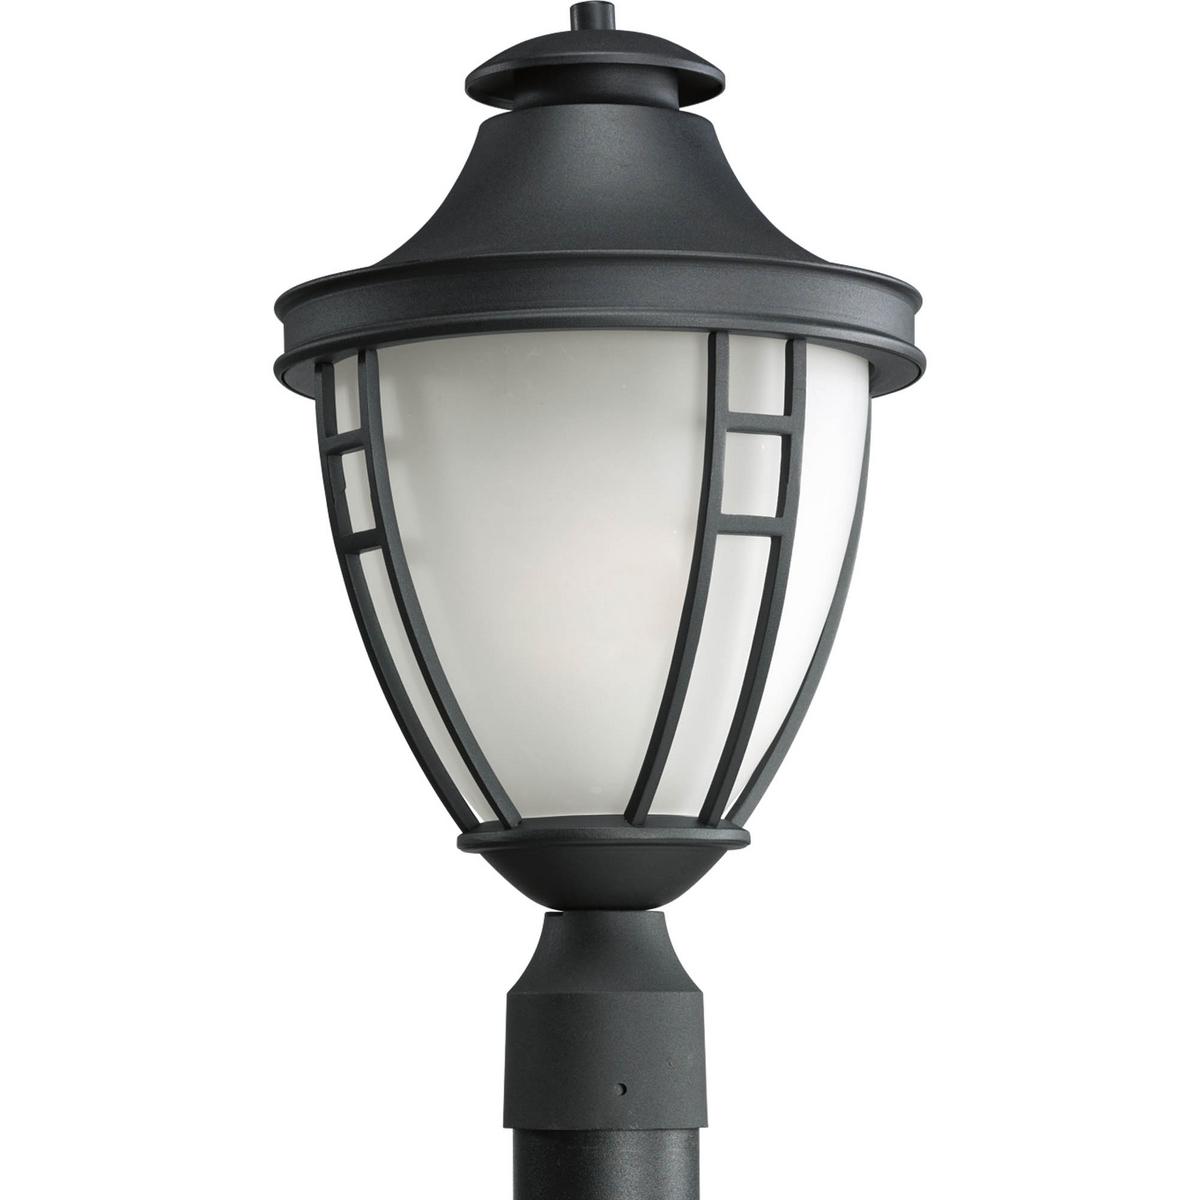 Hubbell P5402-31 One-light steel post lantern with etched glass and a textured Black powdercoat finish.  ; Black finish. ; Etched glass enclosure. ; Textured powdercoat finish.